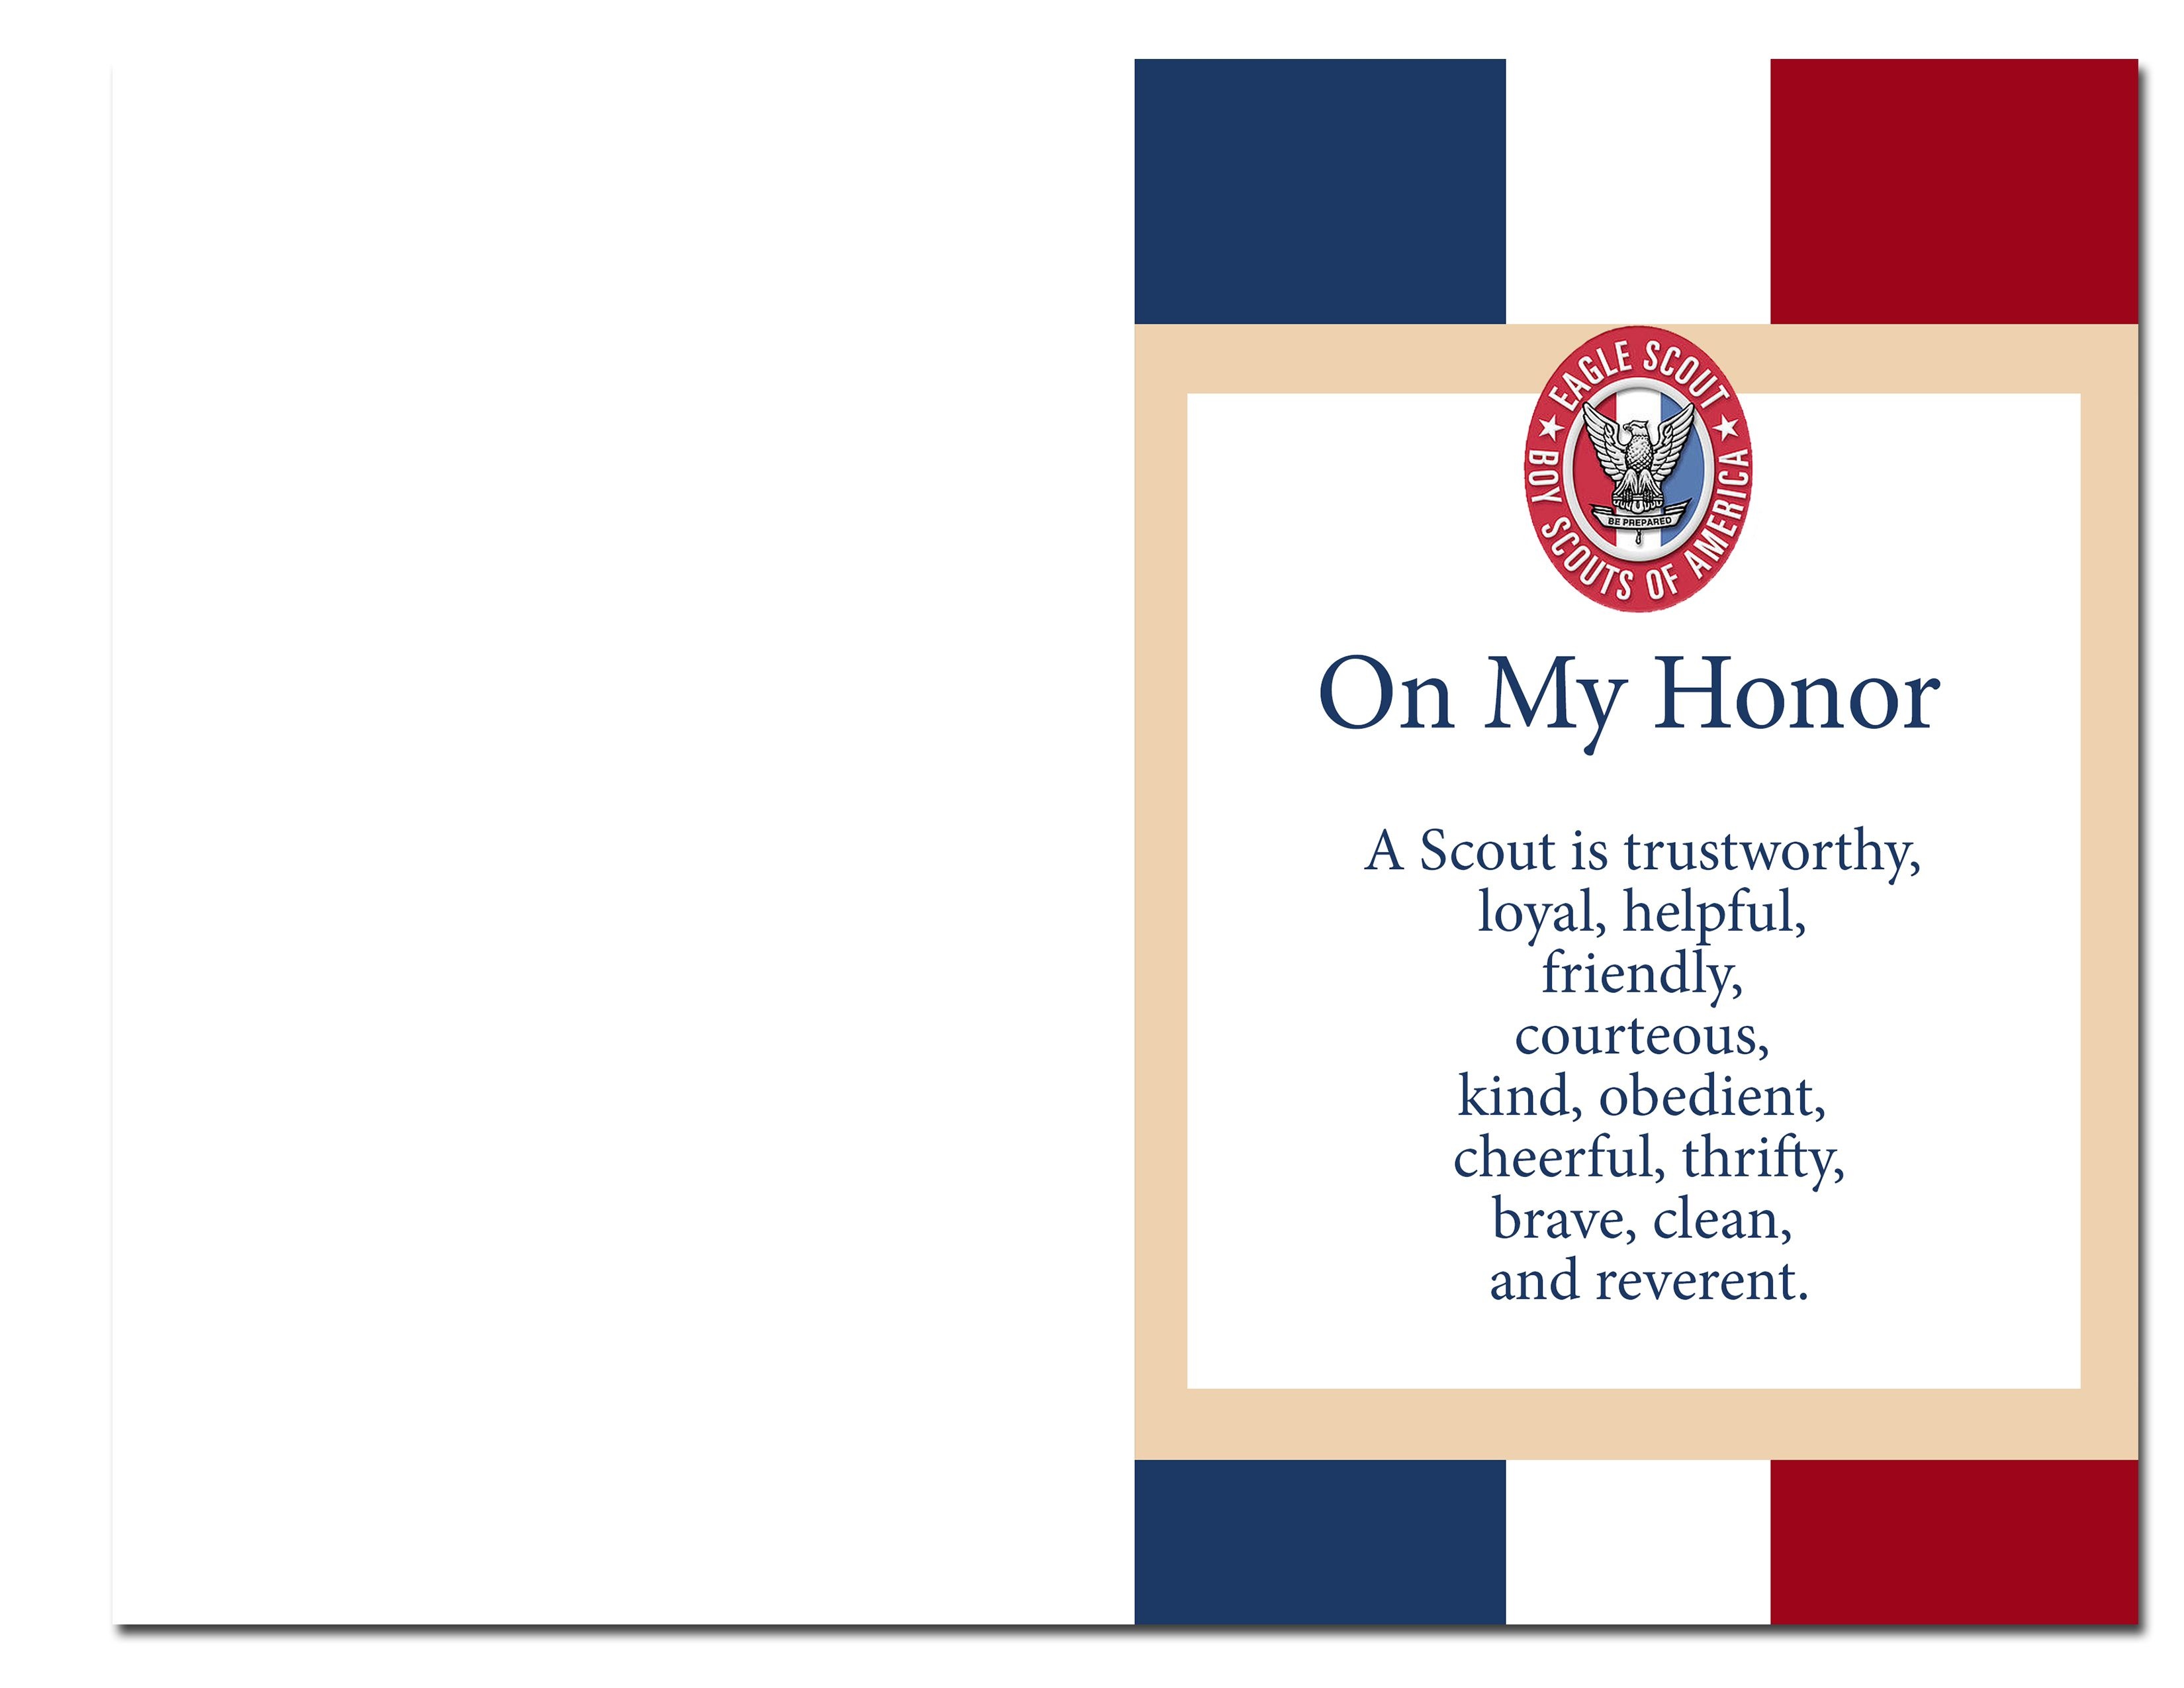 Eagle Scout Court Of Honor Ideas And Free Printables Information within dimensions 3300 X 2550